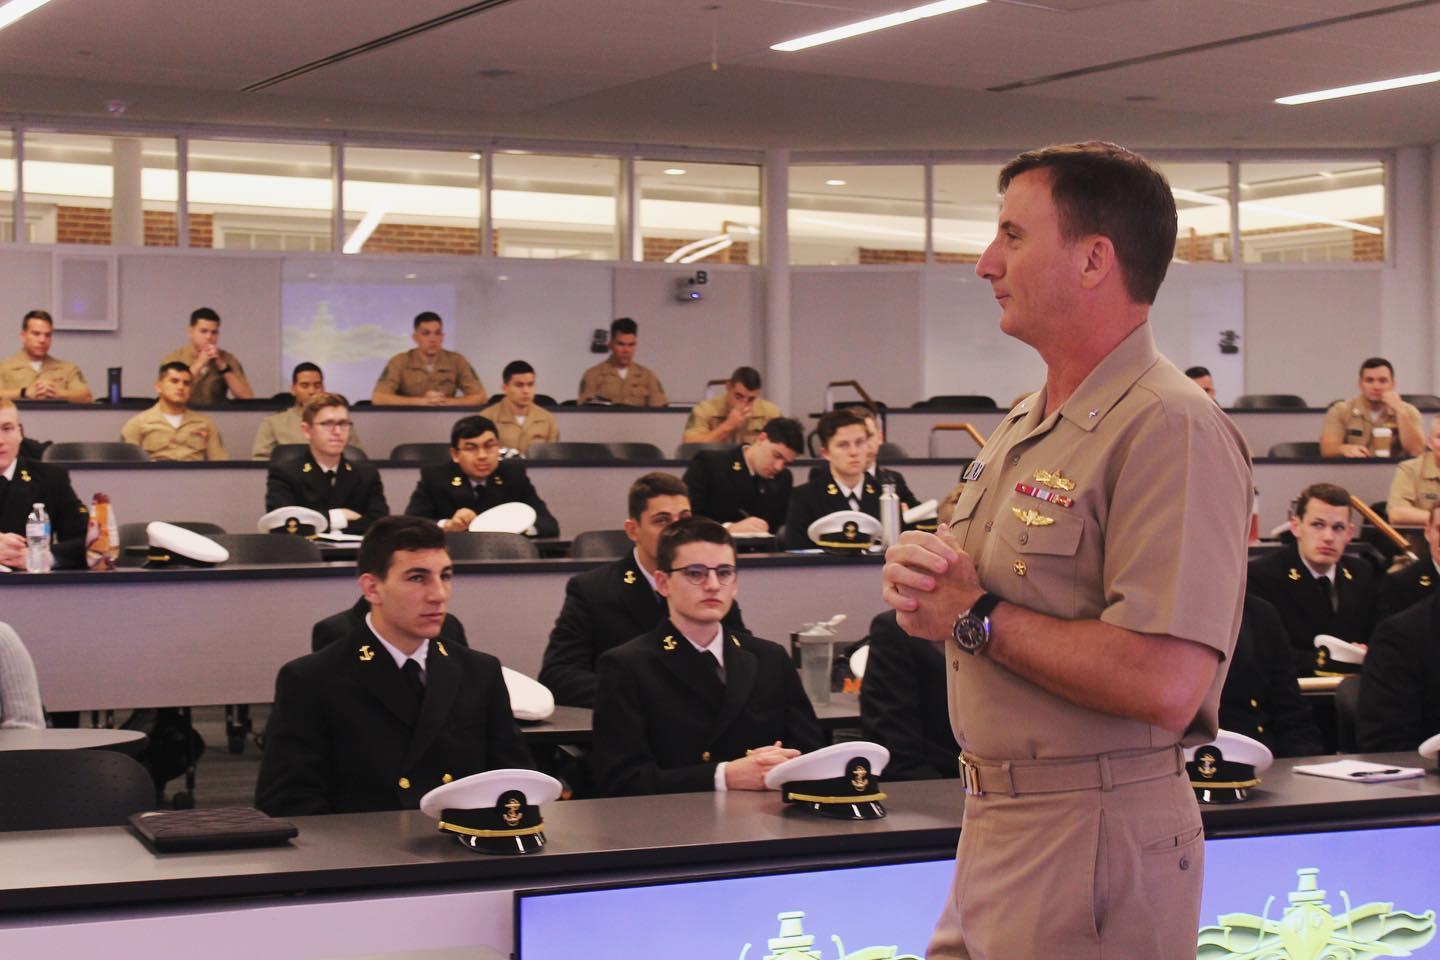 Naval Officer addresses lecture hall of students in uniform